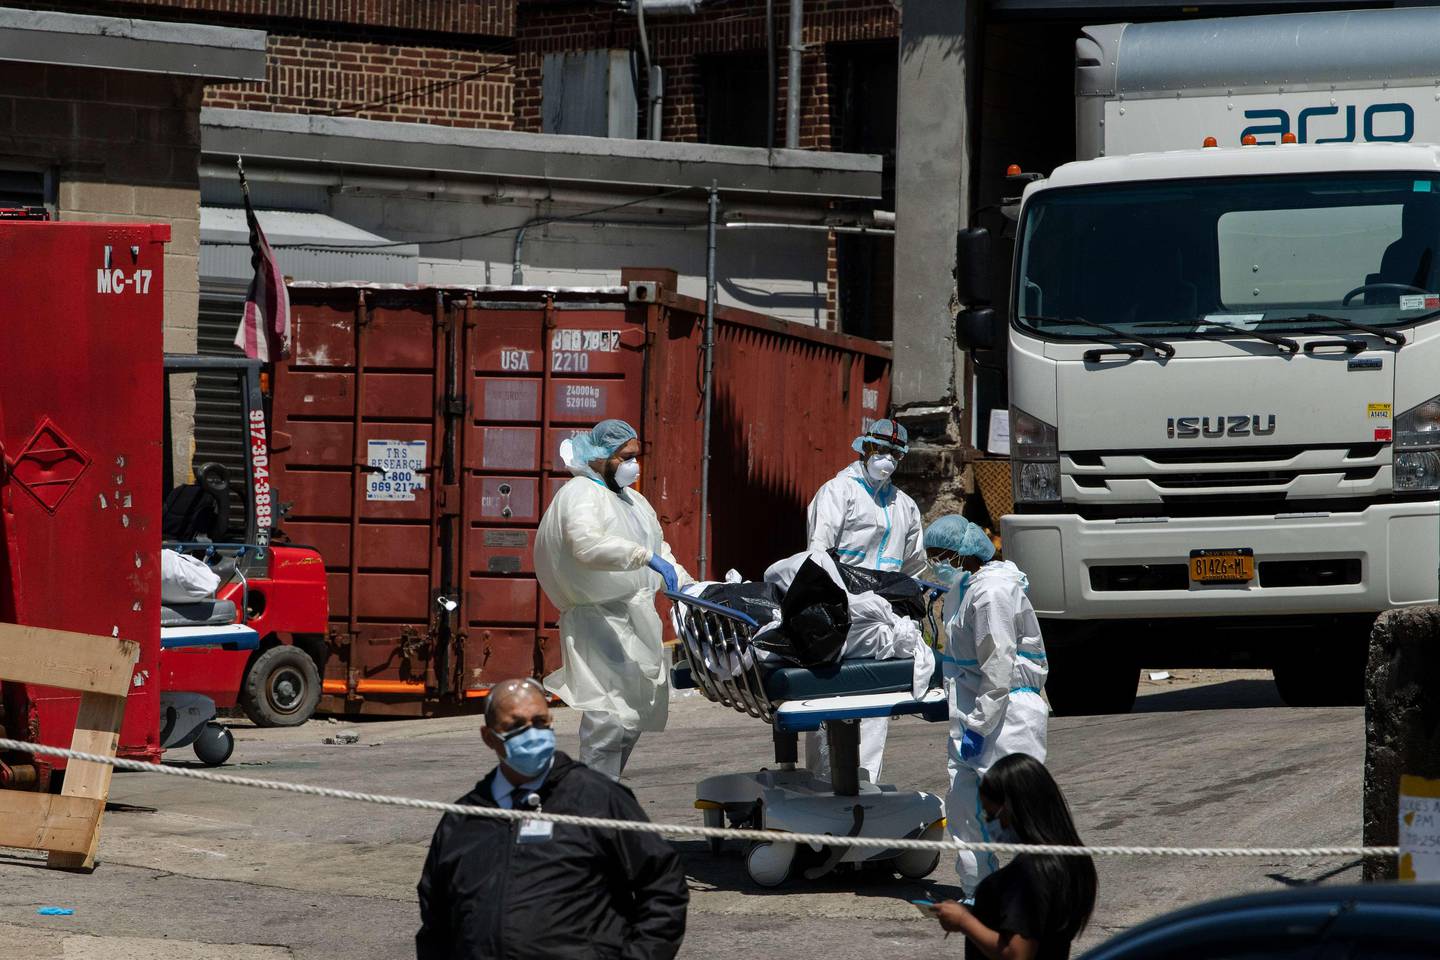 BROOKLYN, NY - MAY 07: Hospital personnel move deceased individuals to the overflow morgue trailer outside The Brooklyn Hospital Center on May 7, 2020 in the Brooklyn borough of New York City. As the COVID-19 pandemic continues, hospitals remain overwhelmed by the number of deaths related to the coronavirus.   Bryan Thomas/Getty Images/AFP
== FOR NEWSPAPERS, INTERNET, TELCOS & TELEVISION USE ONLY ==